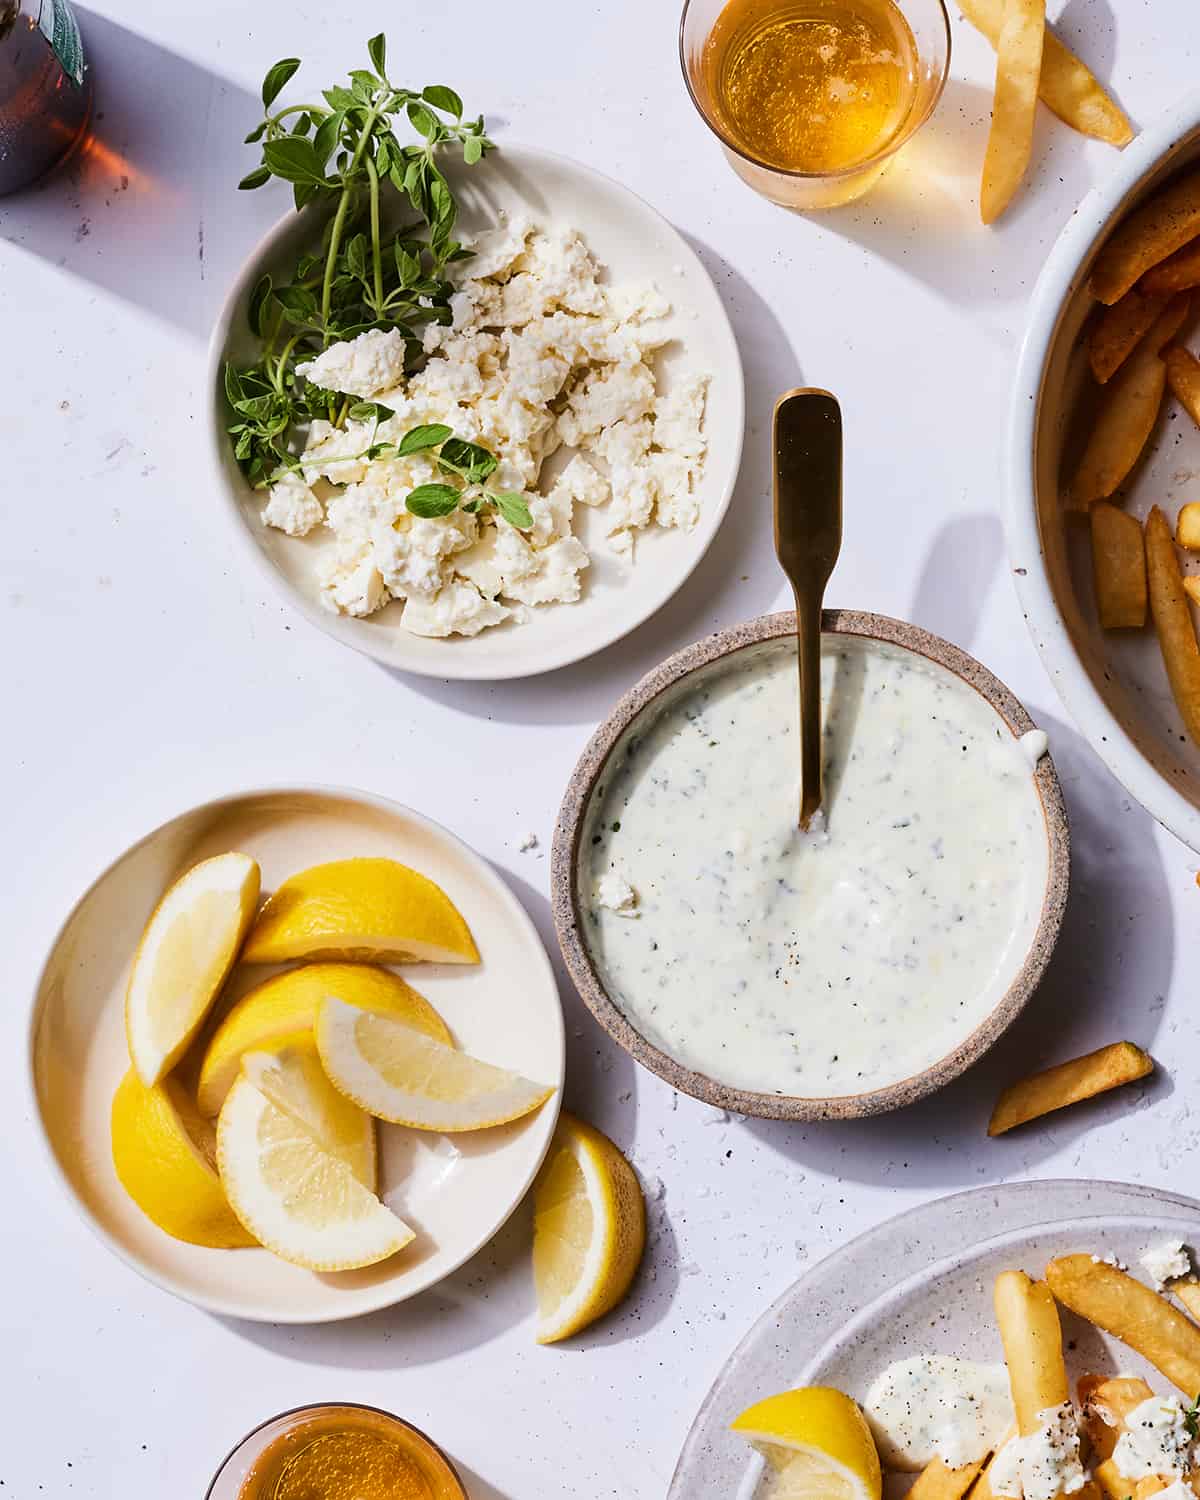 A bowl of feta dipping sauce next to a plate of lemons and a bowl of feta.  